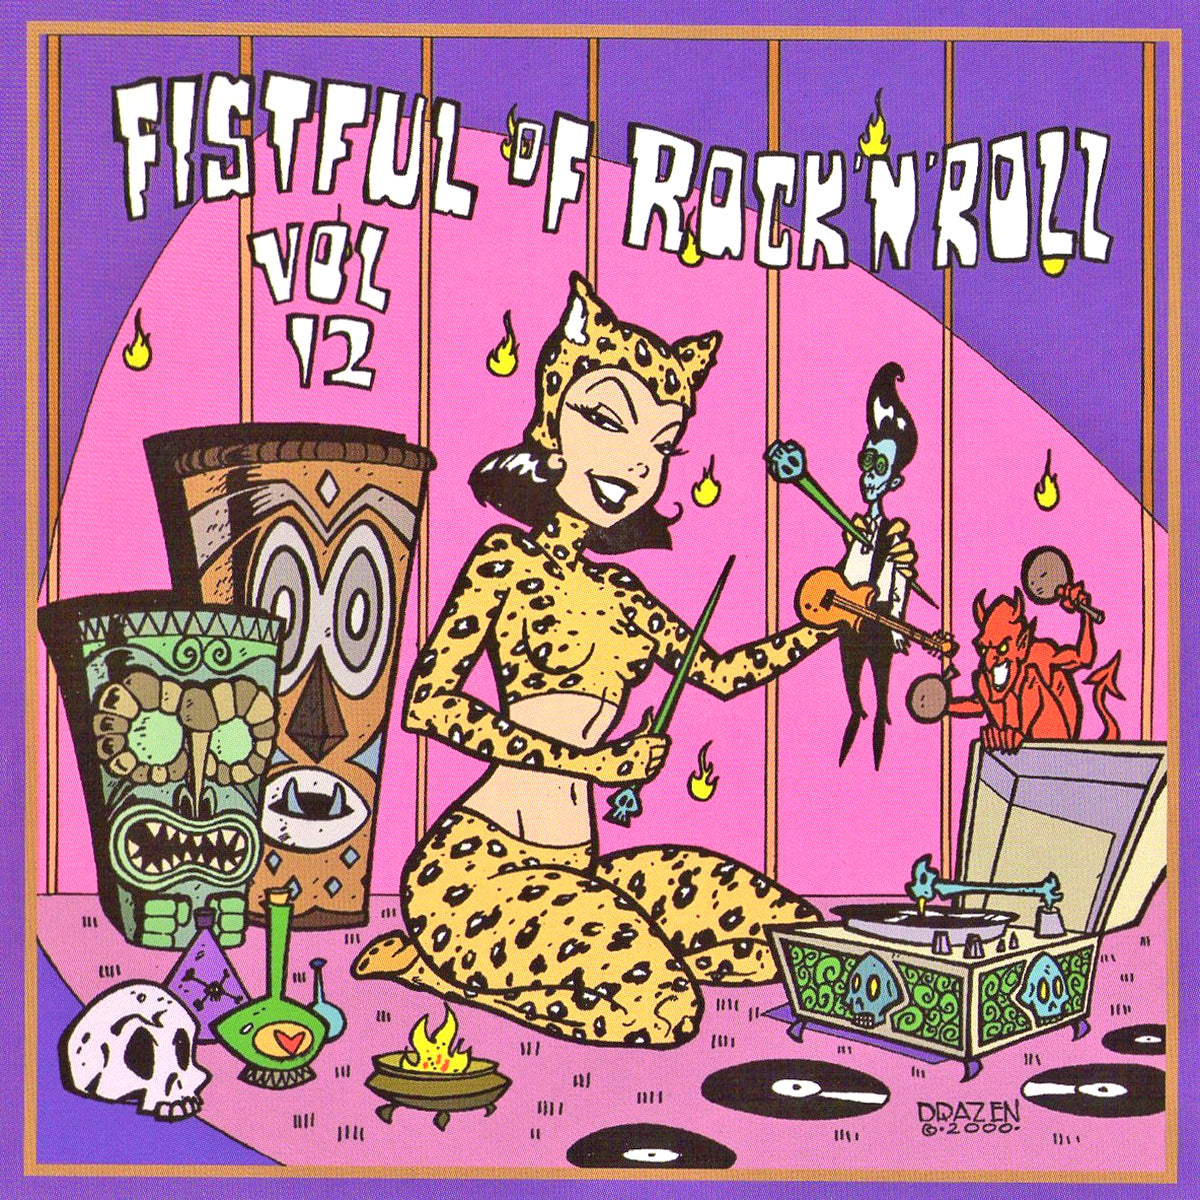 V/A- A Fistful Of Rock 'N' Roll Volume 12 CD  ~W/ ROCKET FROM THE CRYPT + THE NOMADS!